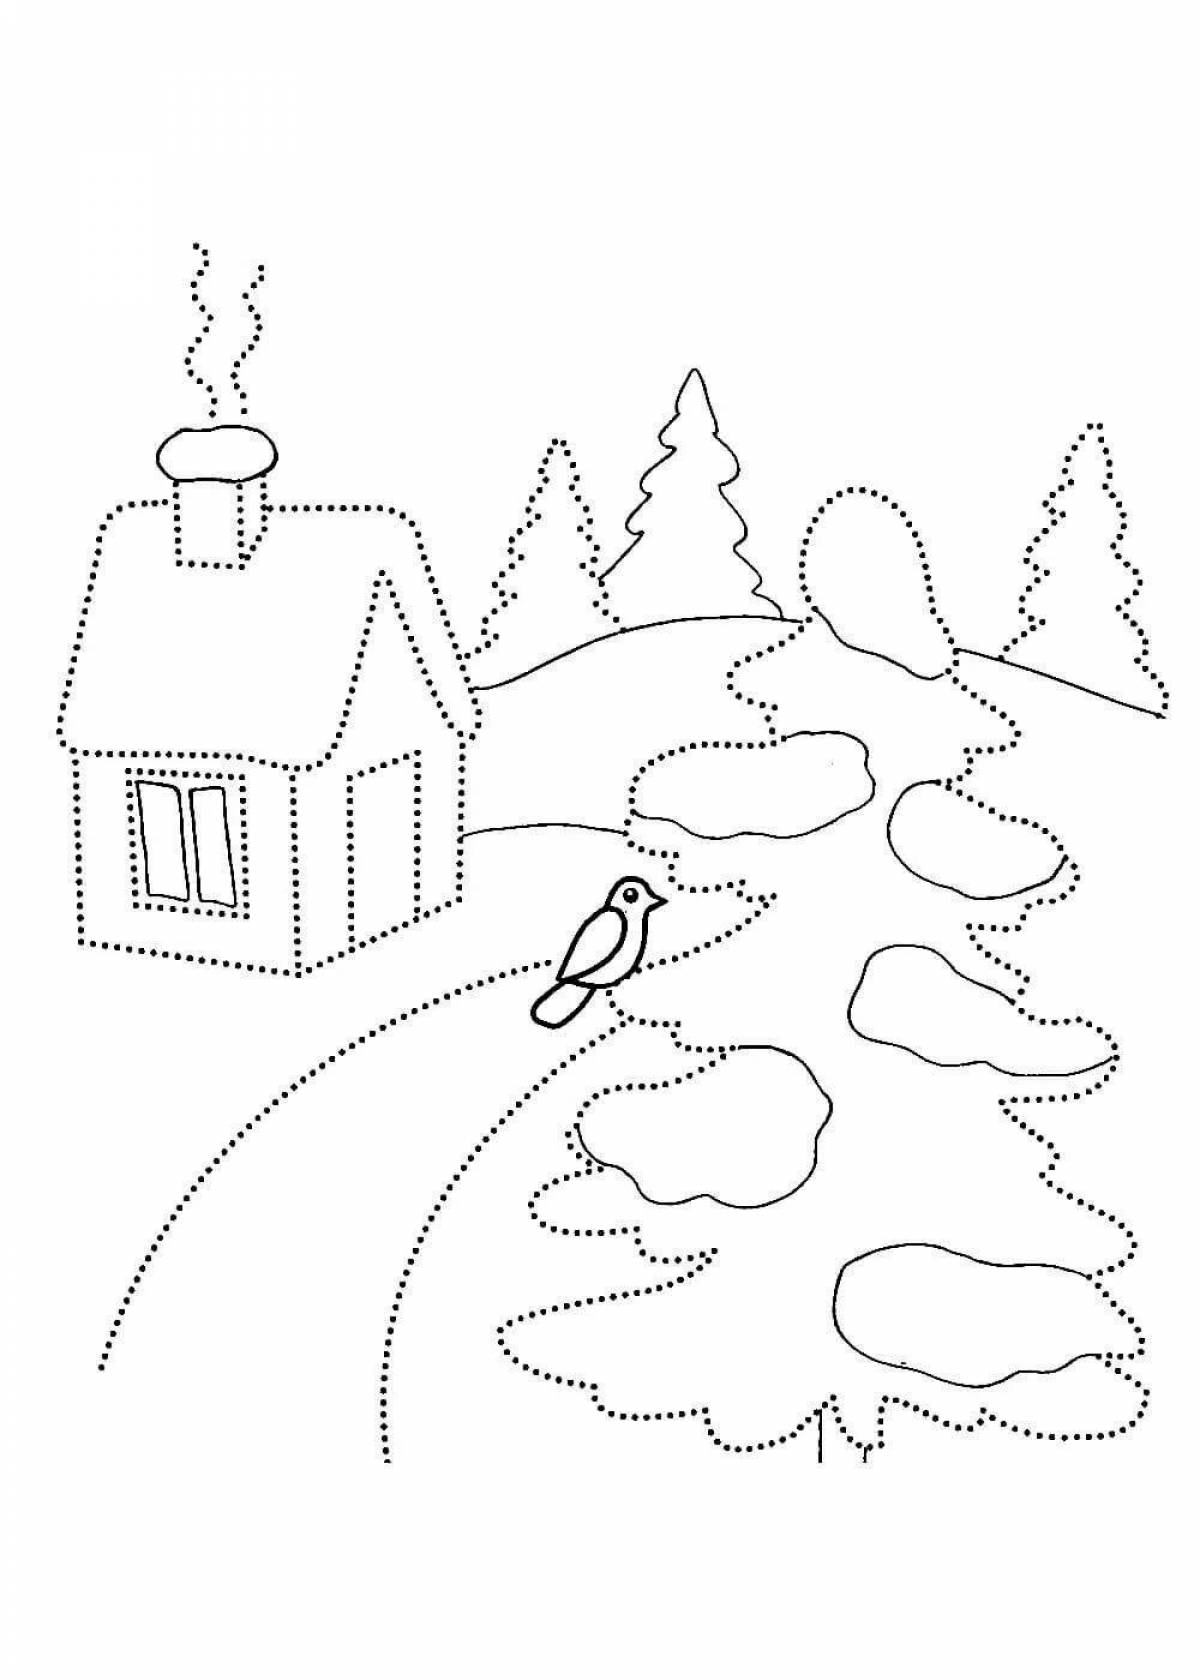 Coloring page charming winter landscape